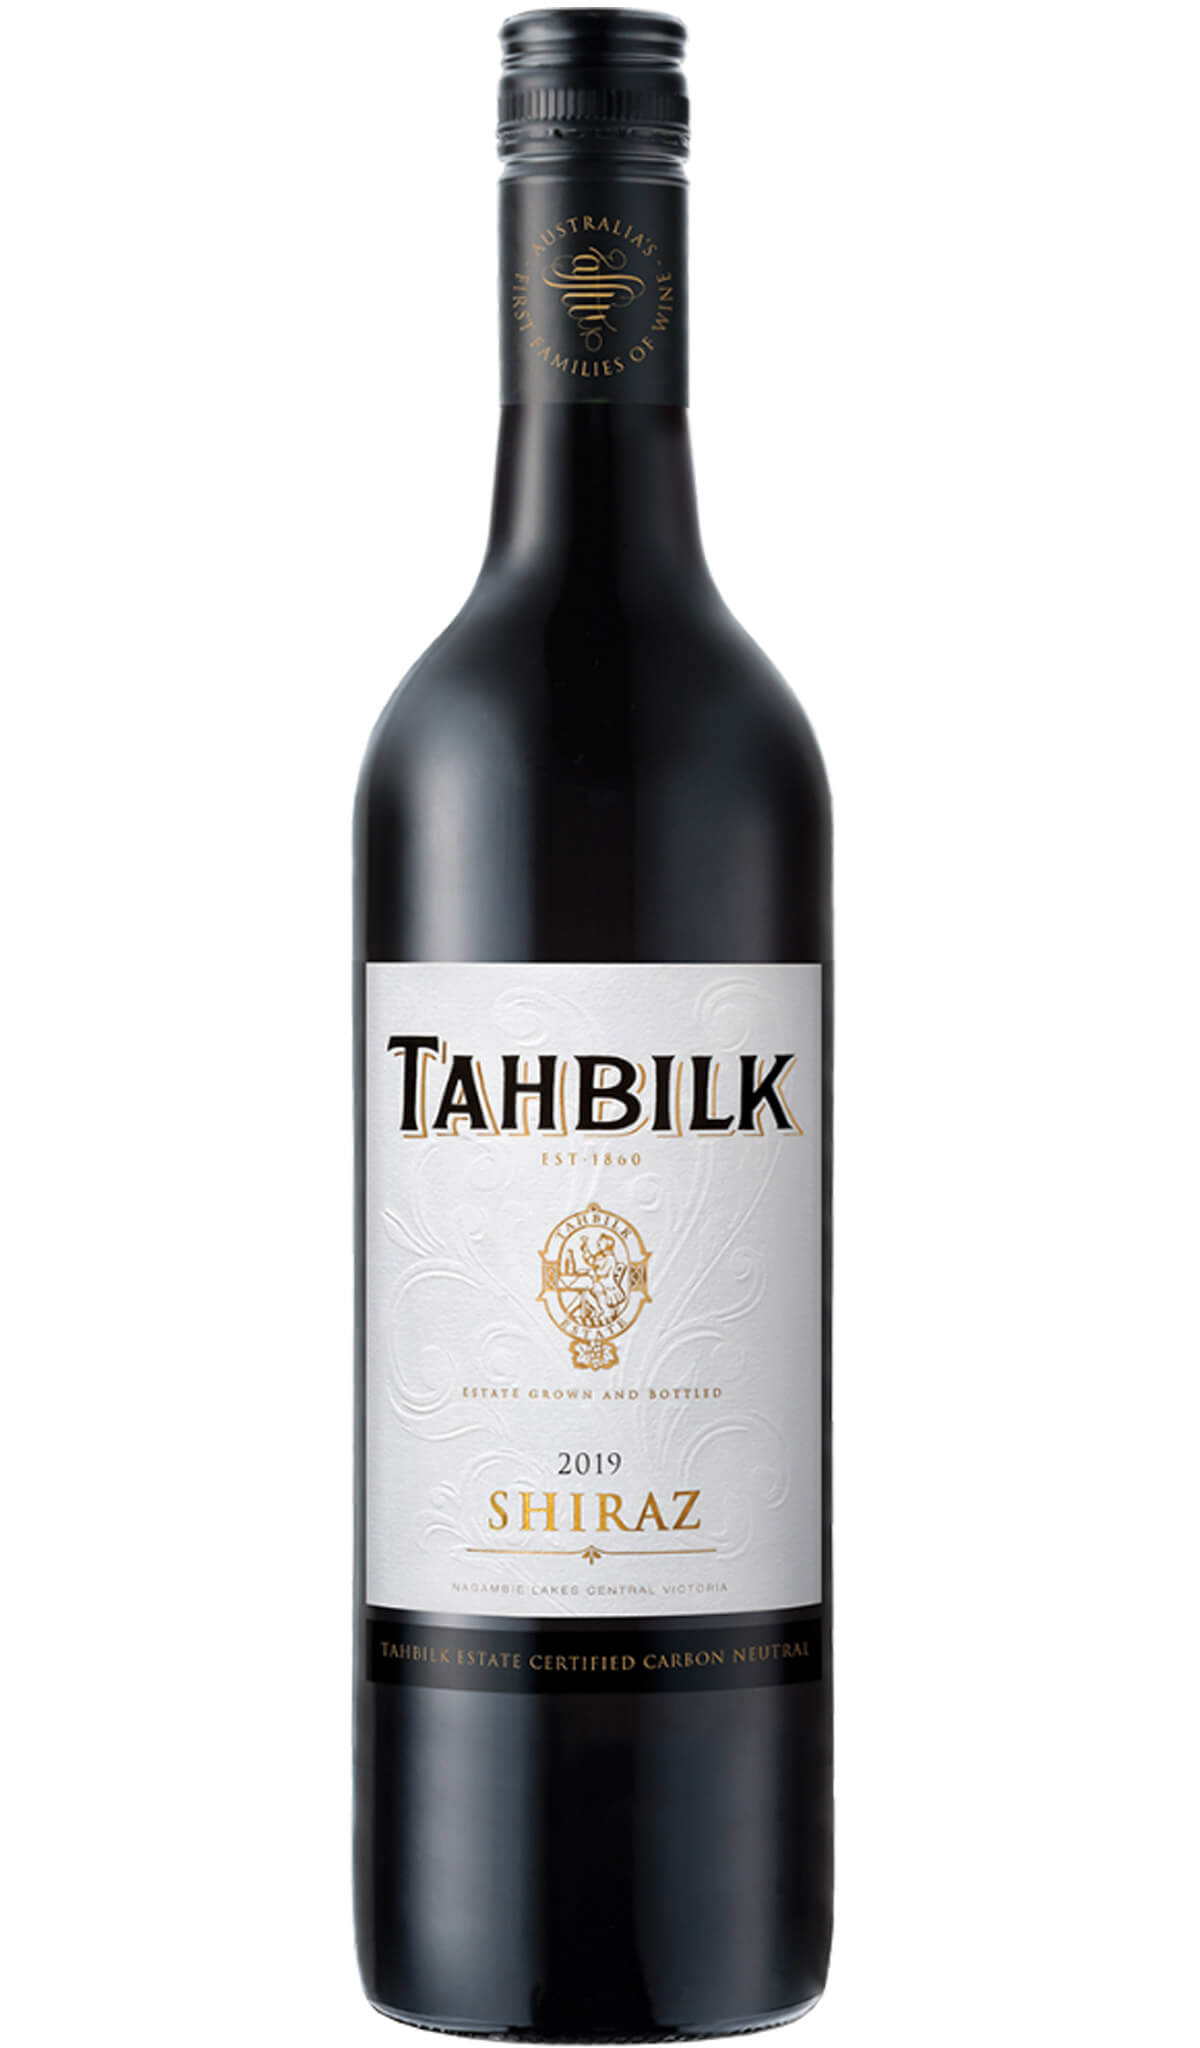 Find out more or buy Tahbilk Shiraz 2019 (Nagambie) online at Wine Sellers Direct - Australia’s independent liquor specialists.